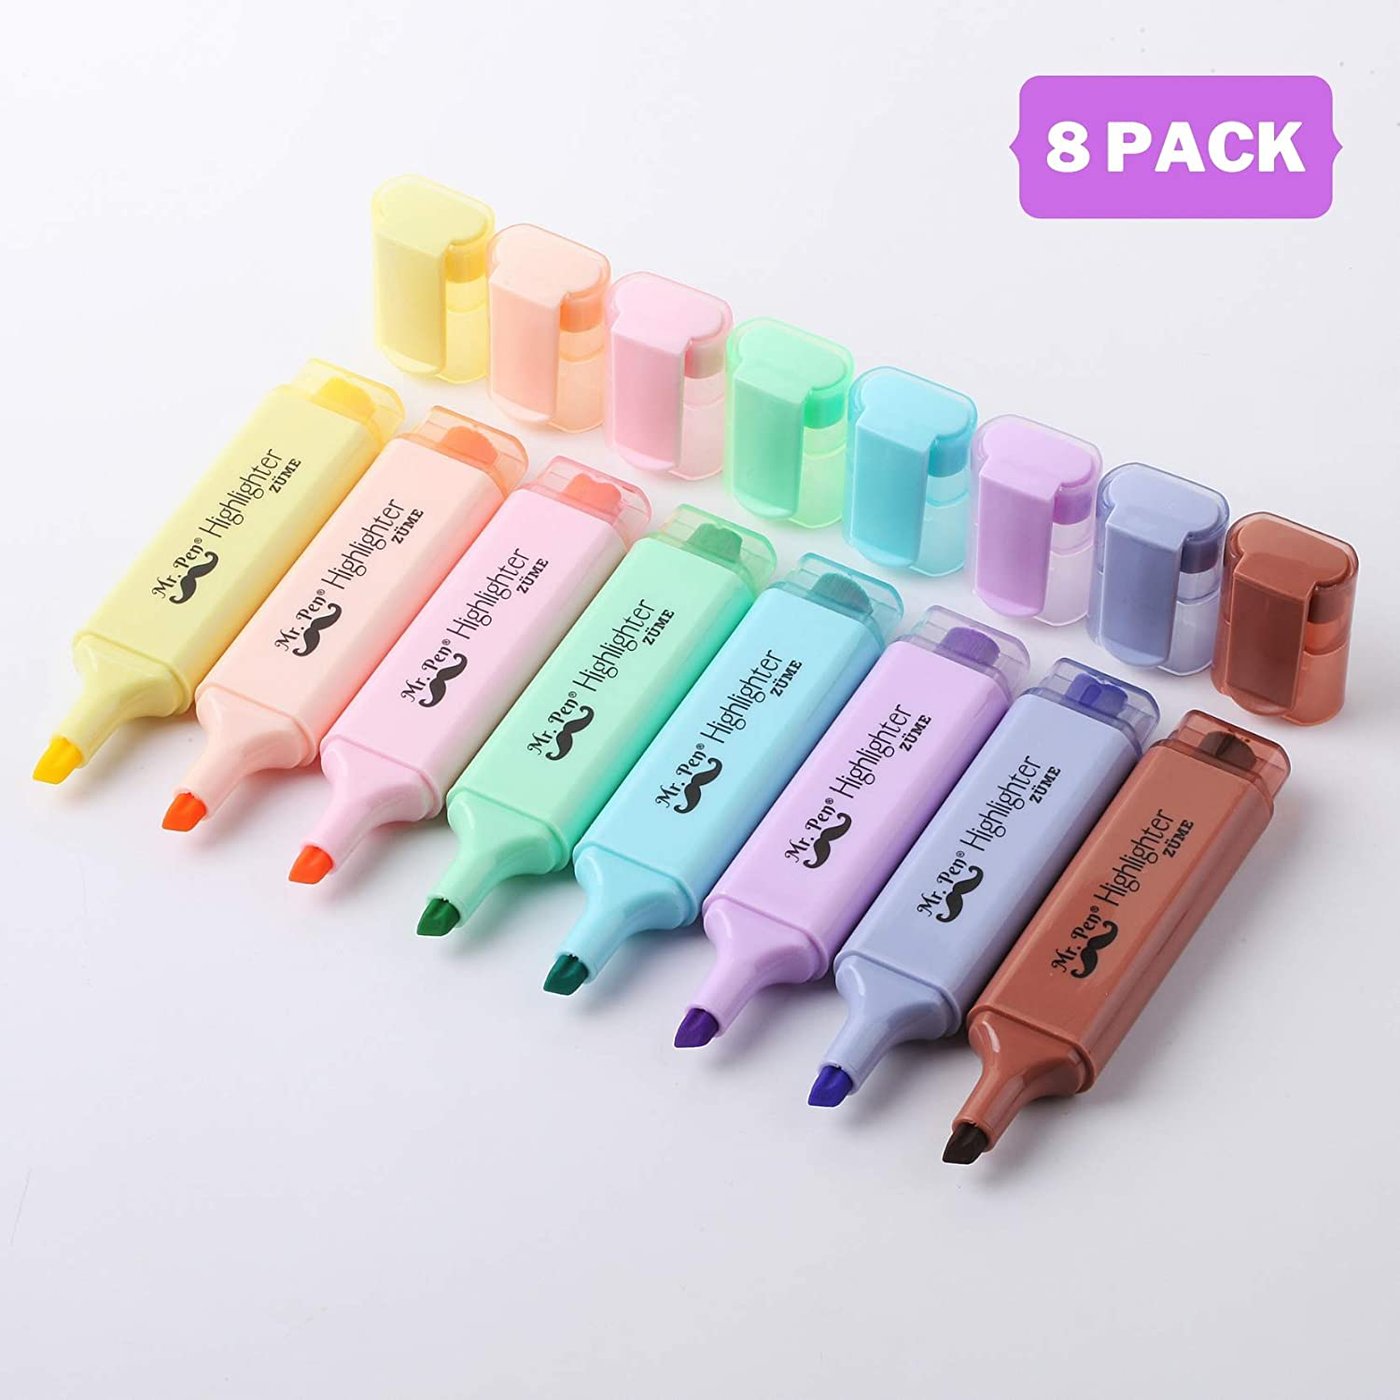 Mr. Pen- Pastel Highlighters, 8 Pack, Chisel Tip, Assorted Colors, Highlighters, No Smear Highlighter, Fast Dry, Bible Study Supplies, Pastel Marker, Pastel School Supplies, Pastel Highlighter Set